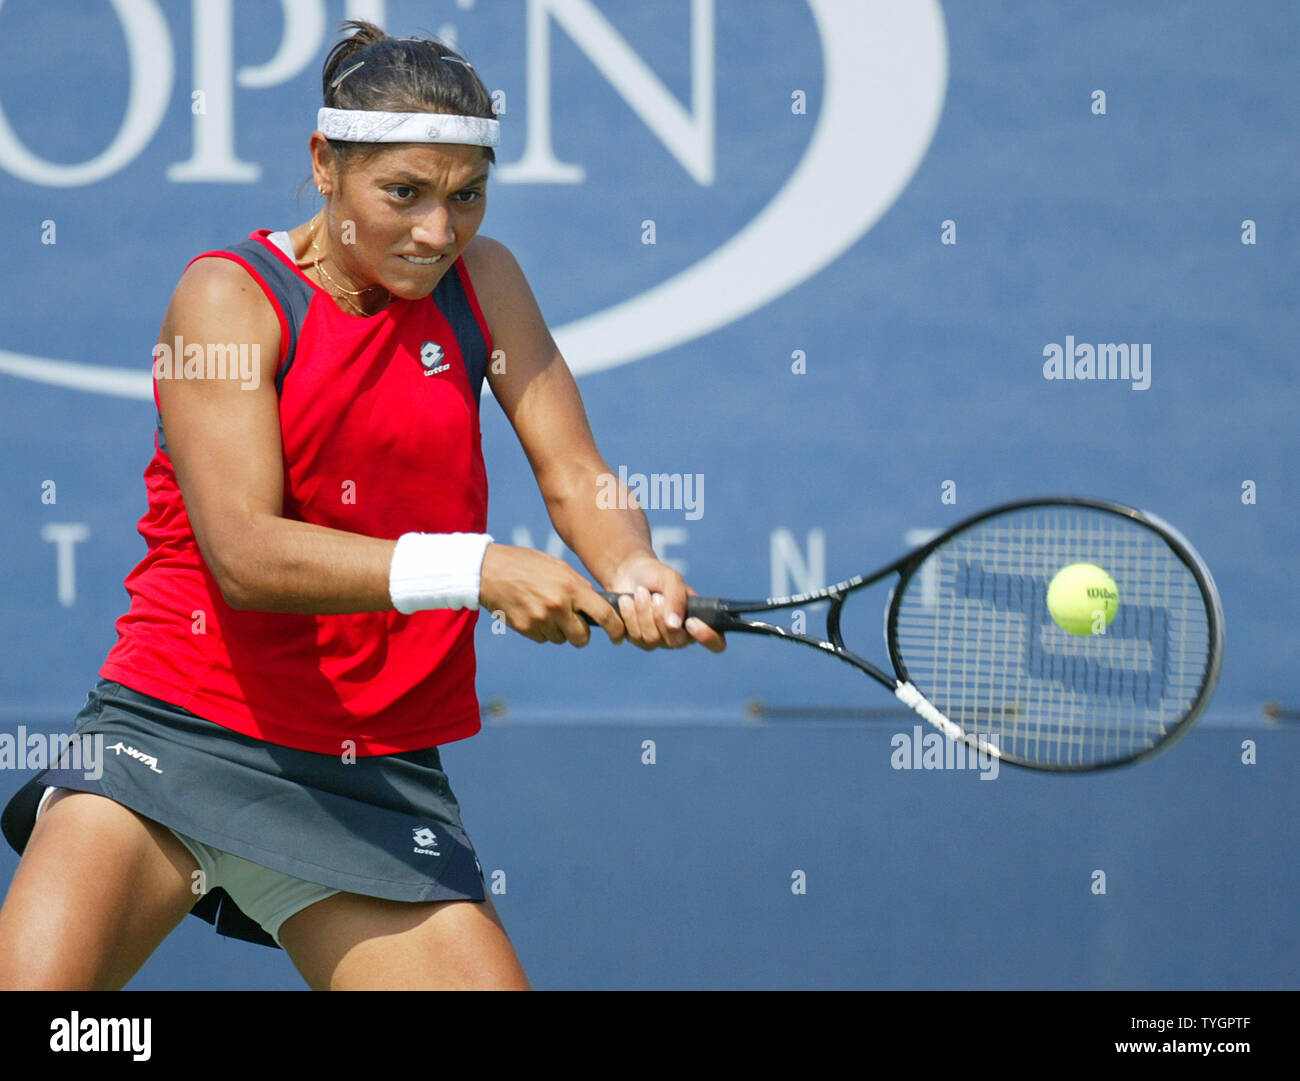 Paola Suarez (ARG) hits a backhand in her straight sets loss to Shinobu Asagoe (JPN) during day 6 action at the US Open in Flushing, New York on September 4, 2004.    (UPI Photo/John Angelillo) Stock Photo